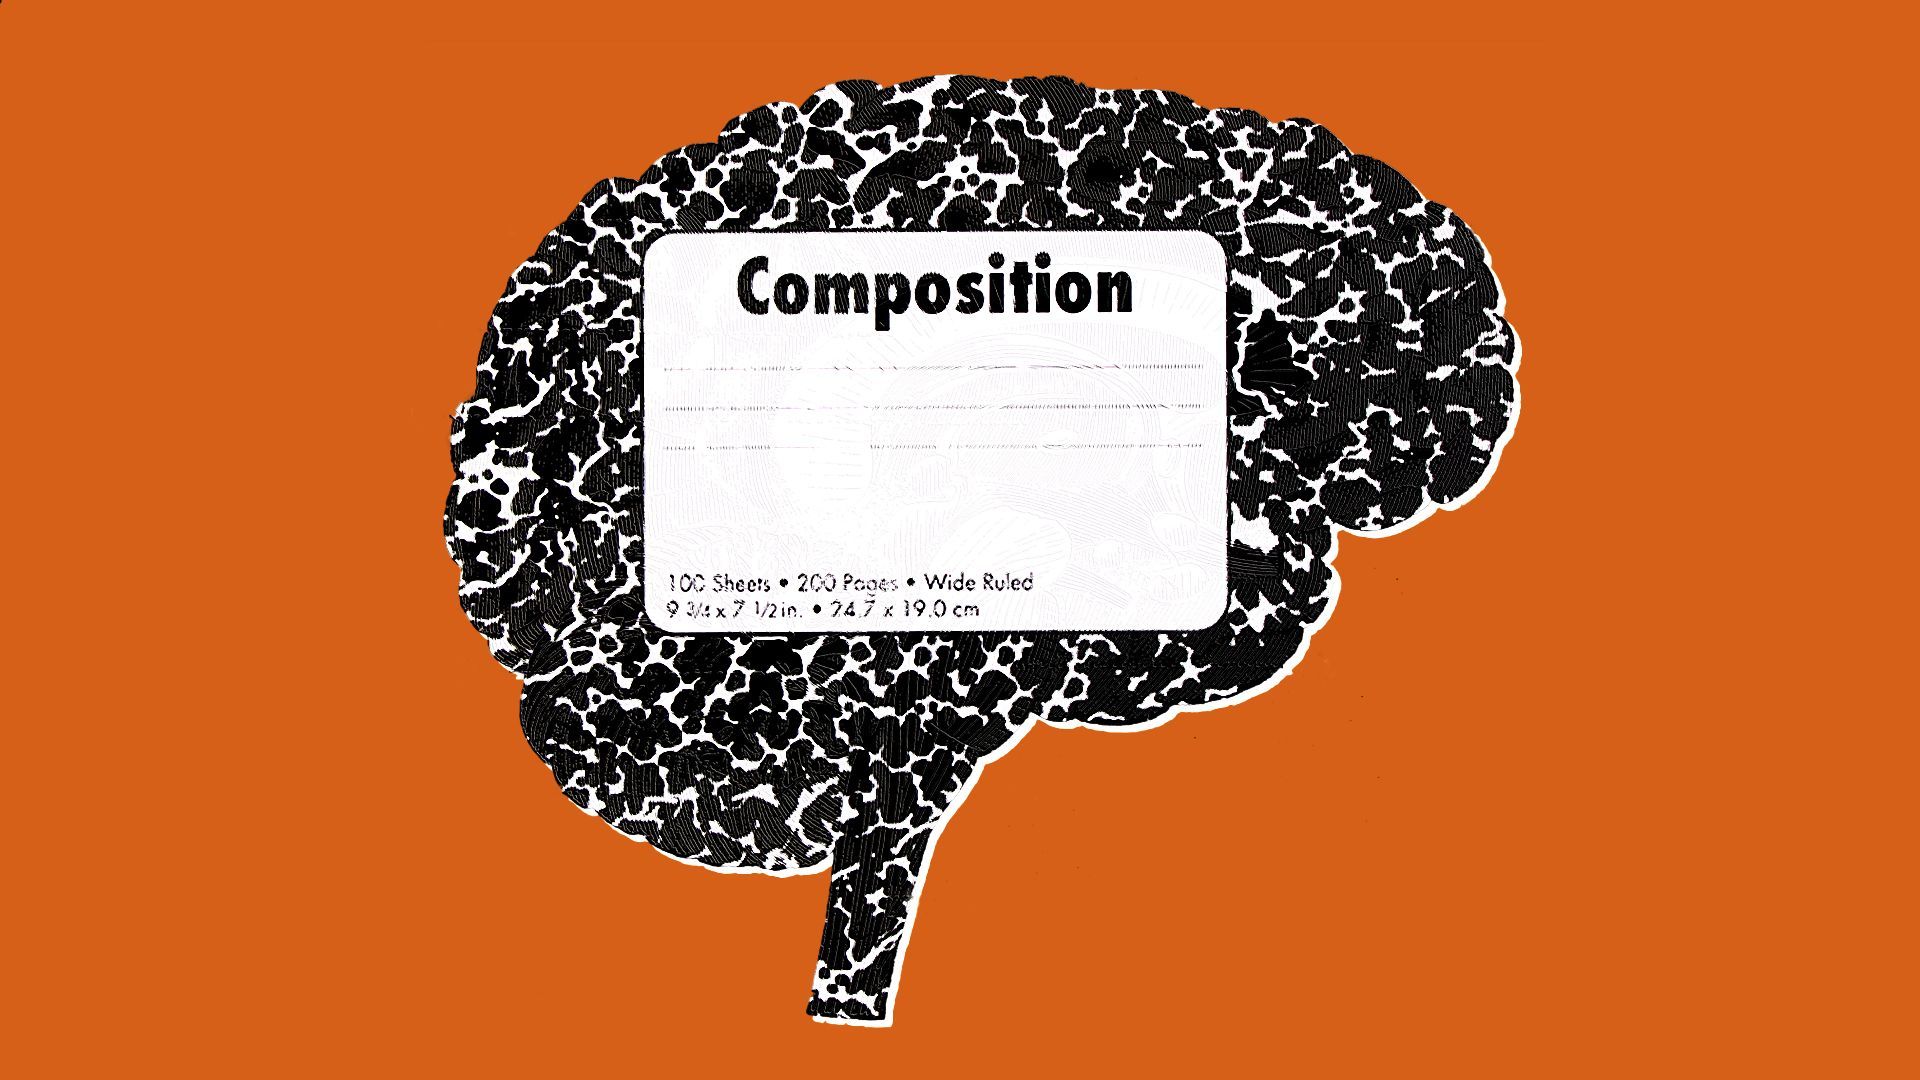 Illustration of a brain shape with a composition notebook texture